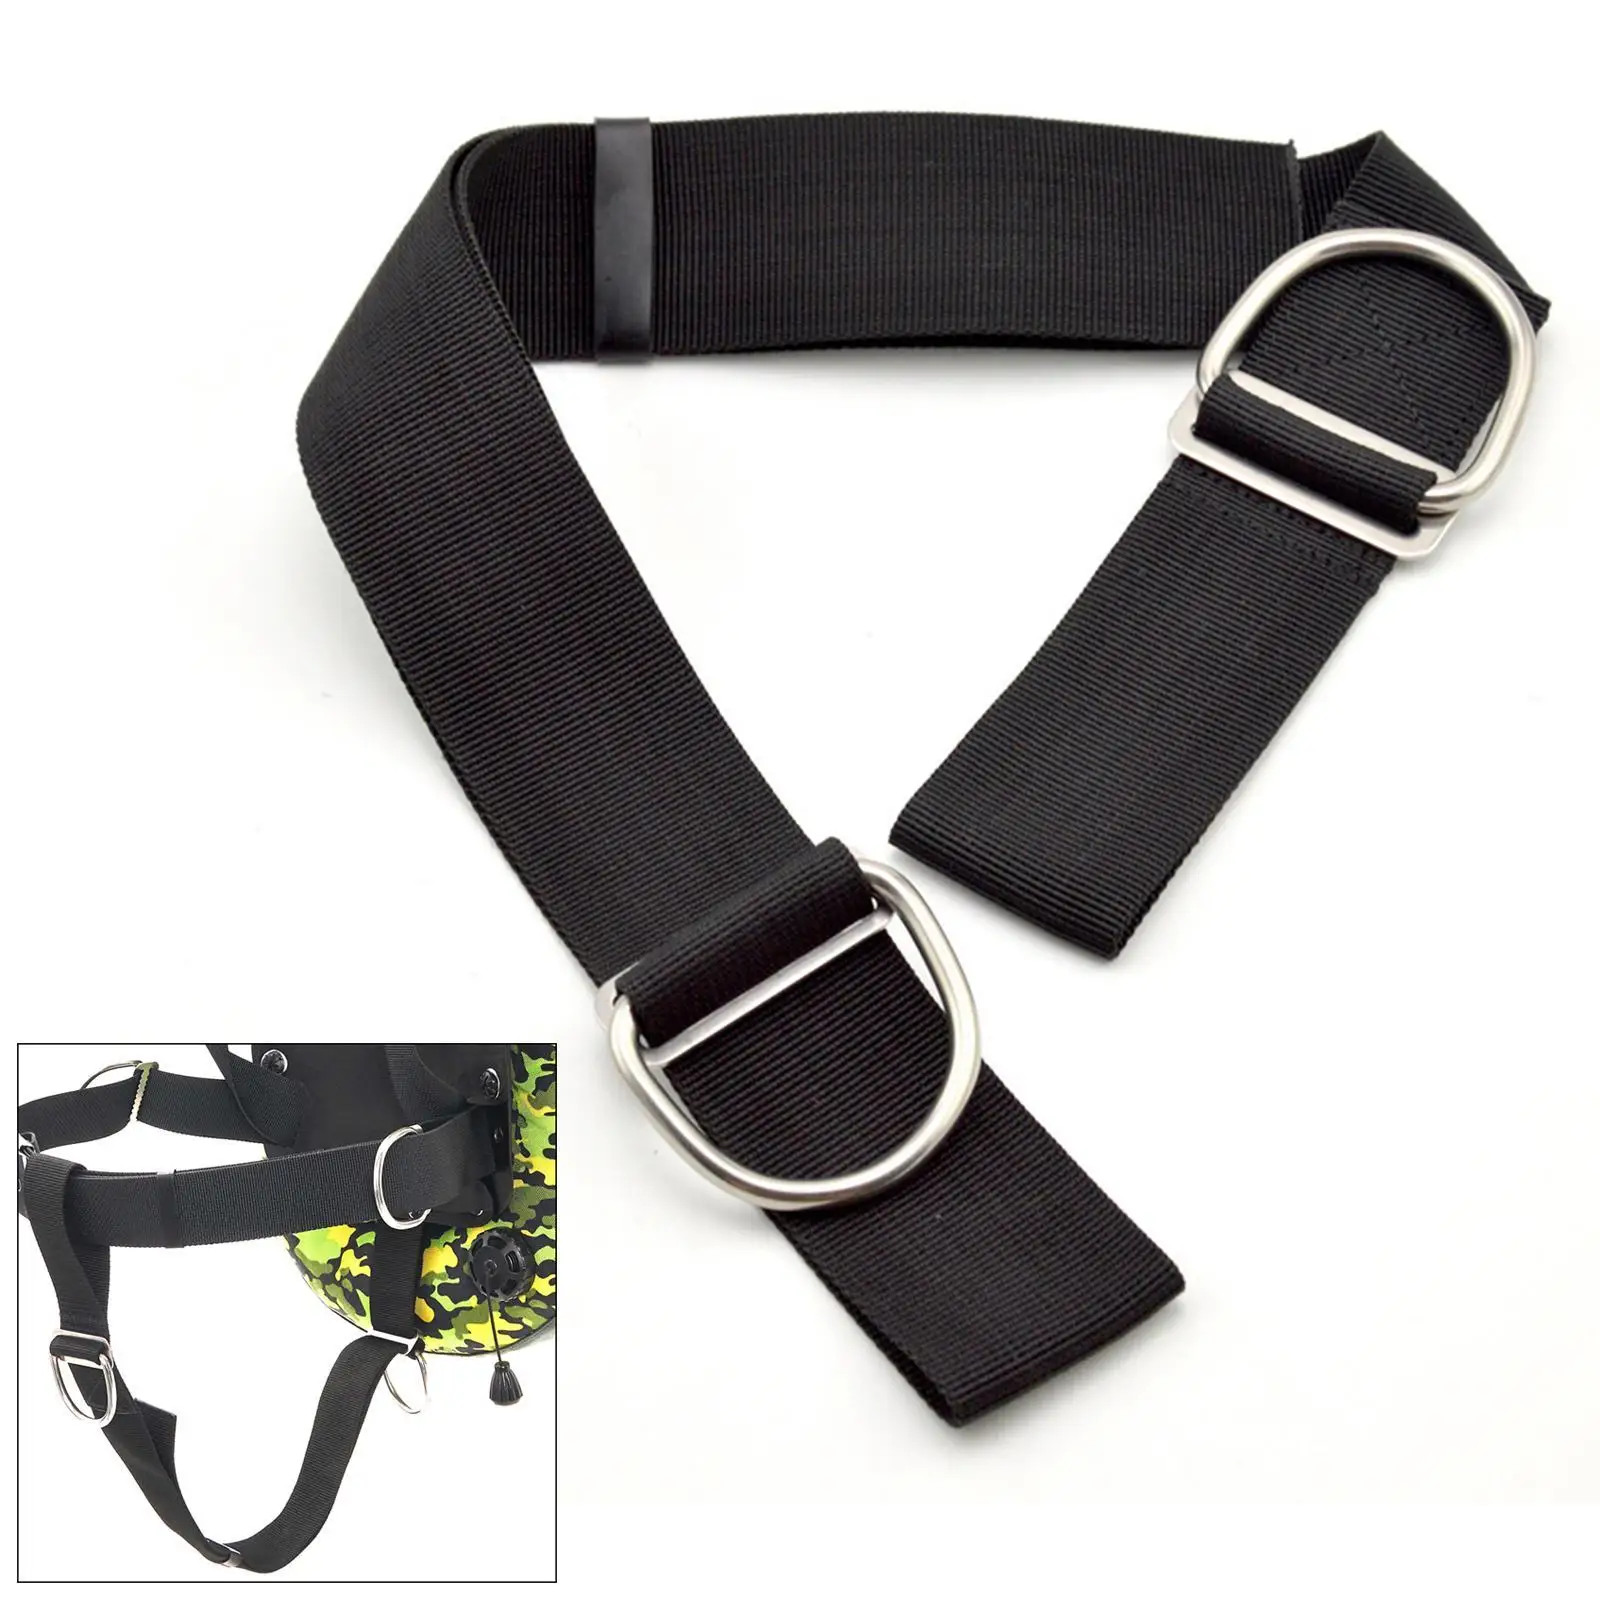  gear  Crotch Strap 50mm/2inch Wide Diving Accessories Part with Loop